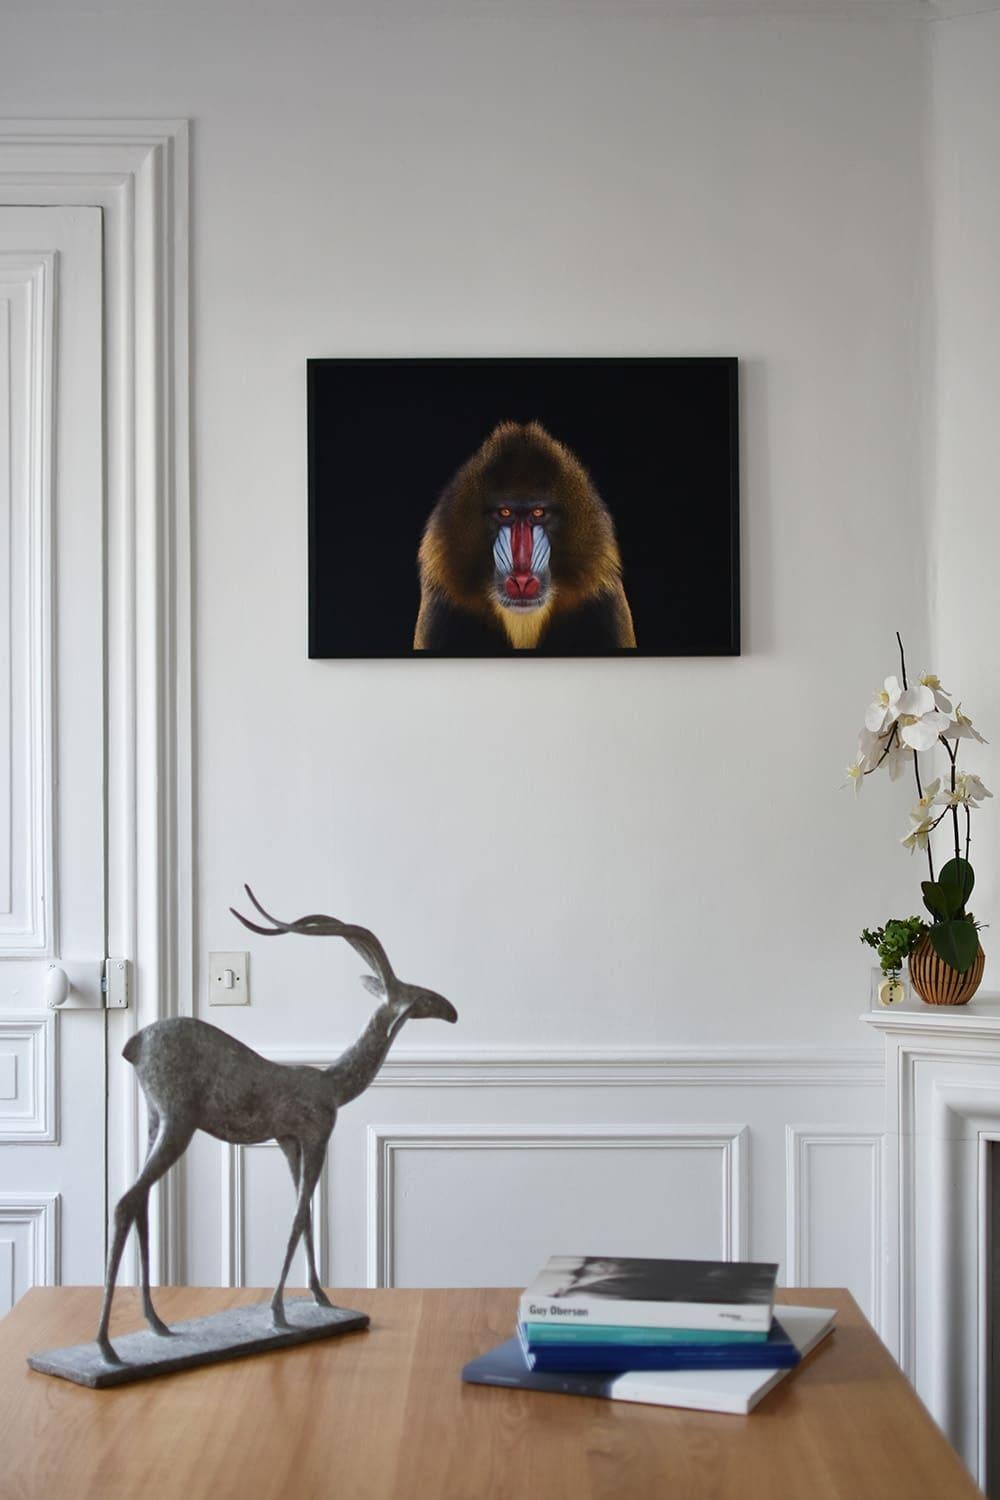 Mandrill #1 by Brad Wilson - Animal portrait photography For Sale 1